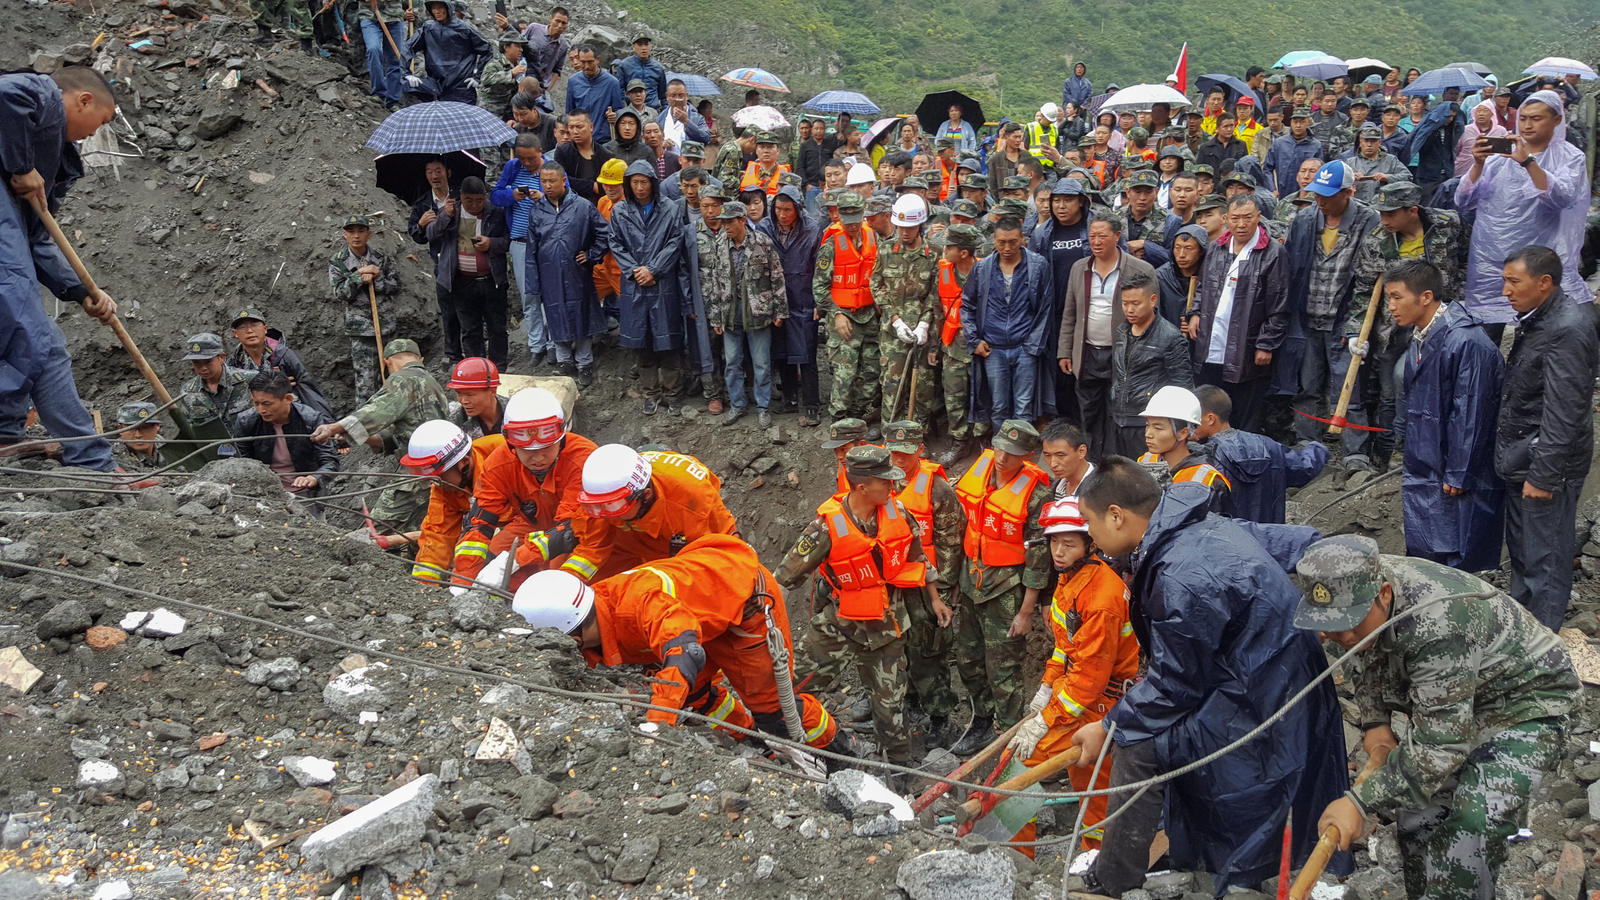 People search for survivors at the site of a landslide in Xinmo Village, Mao County, Sichuan province, China June 24, 2017. China Daily via REUTERS ATTENTION EDITORS - THIS IMAGE WAS PROVIDED BY A THIRD PARTY. CHINA OUT. NO COMMERCIAL OR EDITORIAL SA